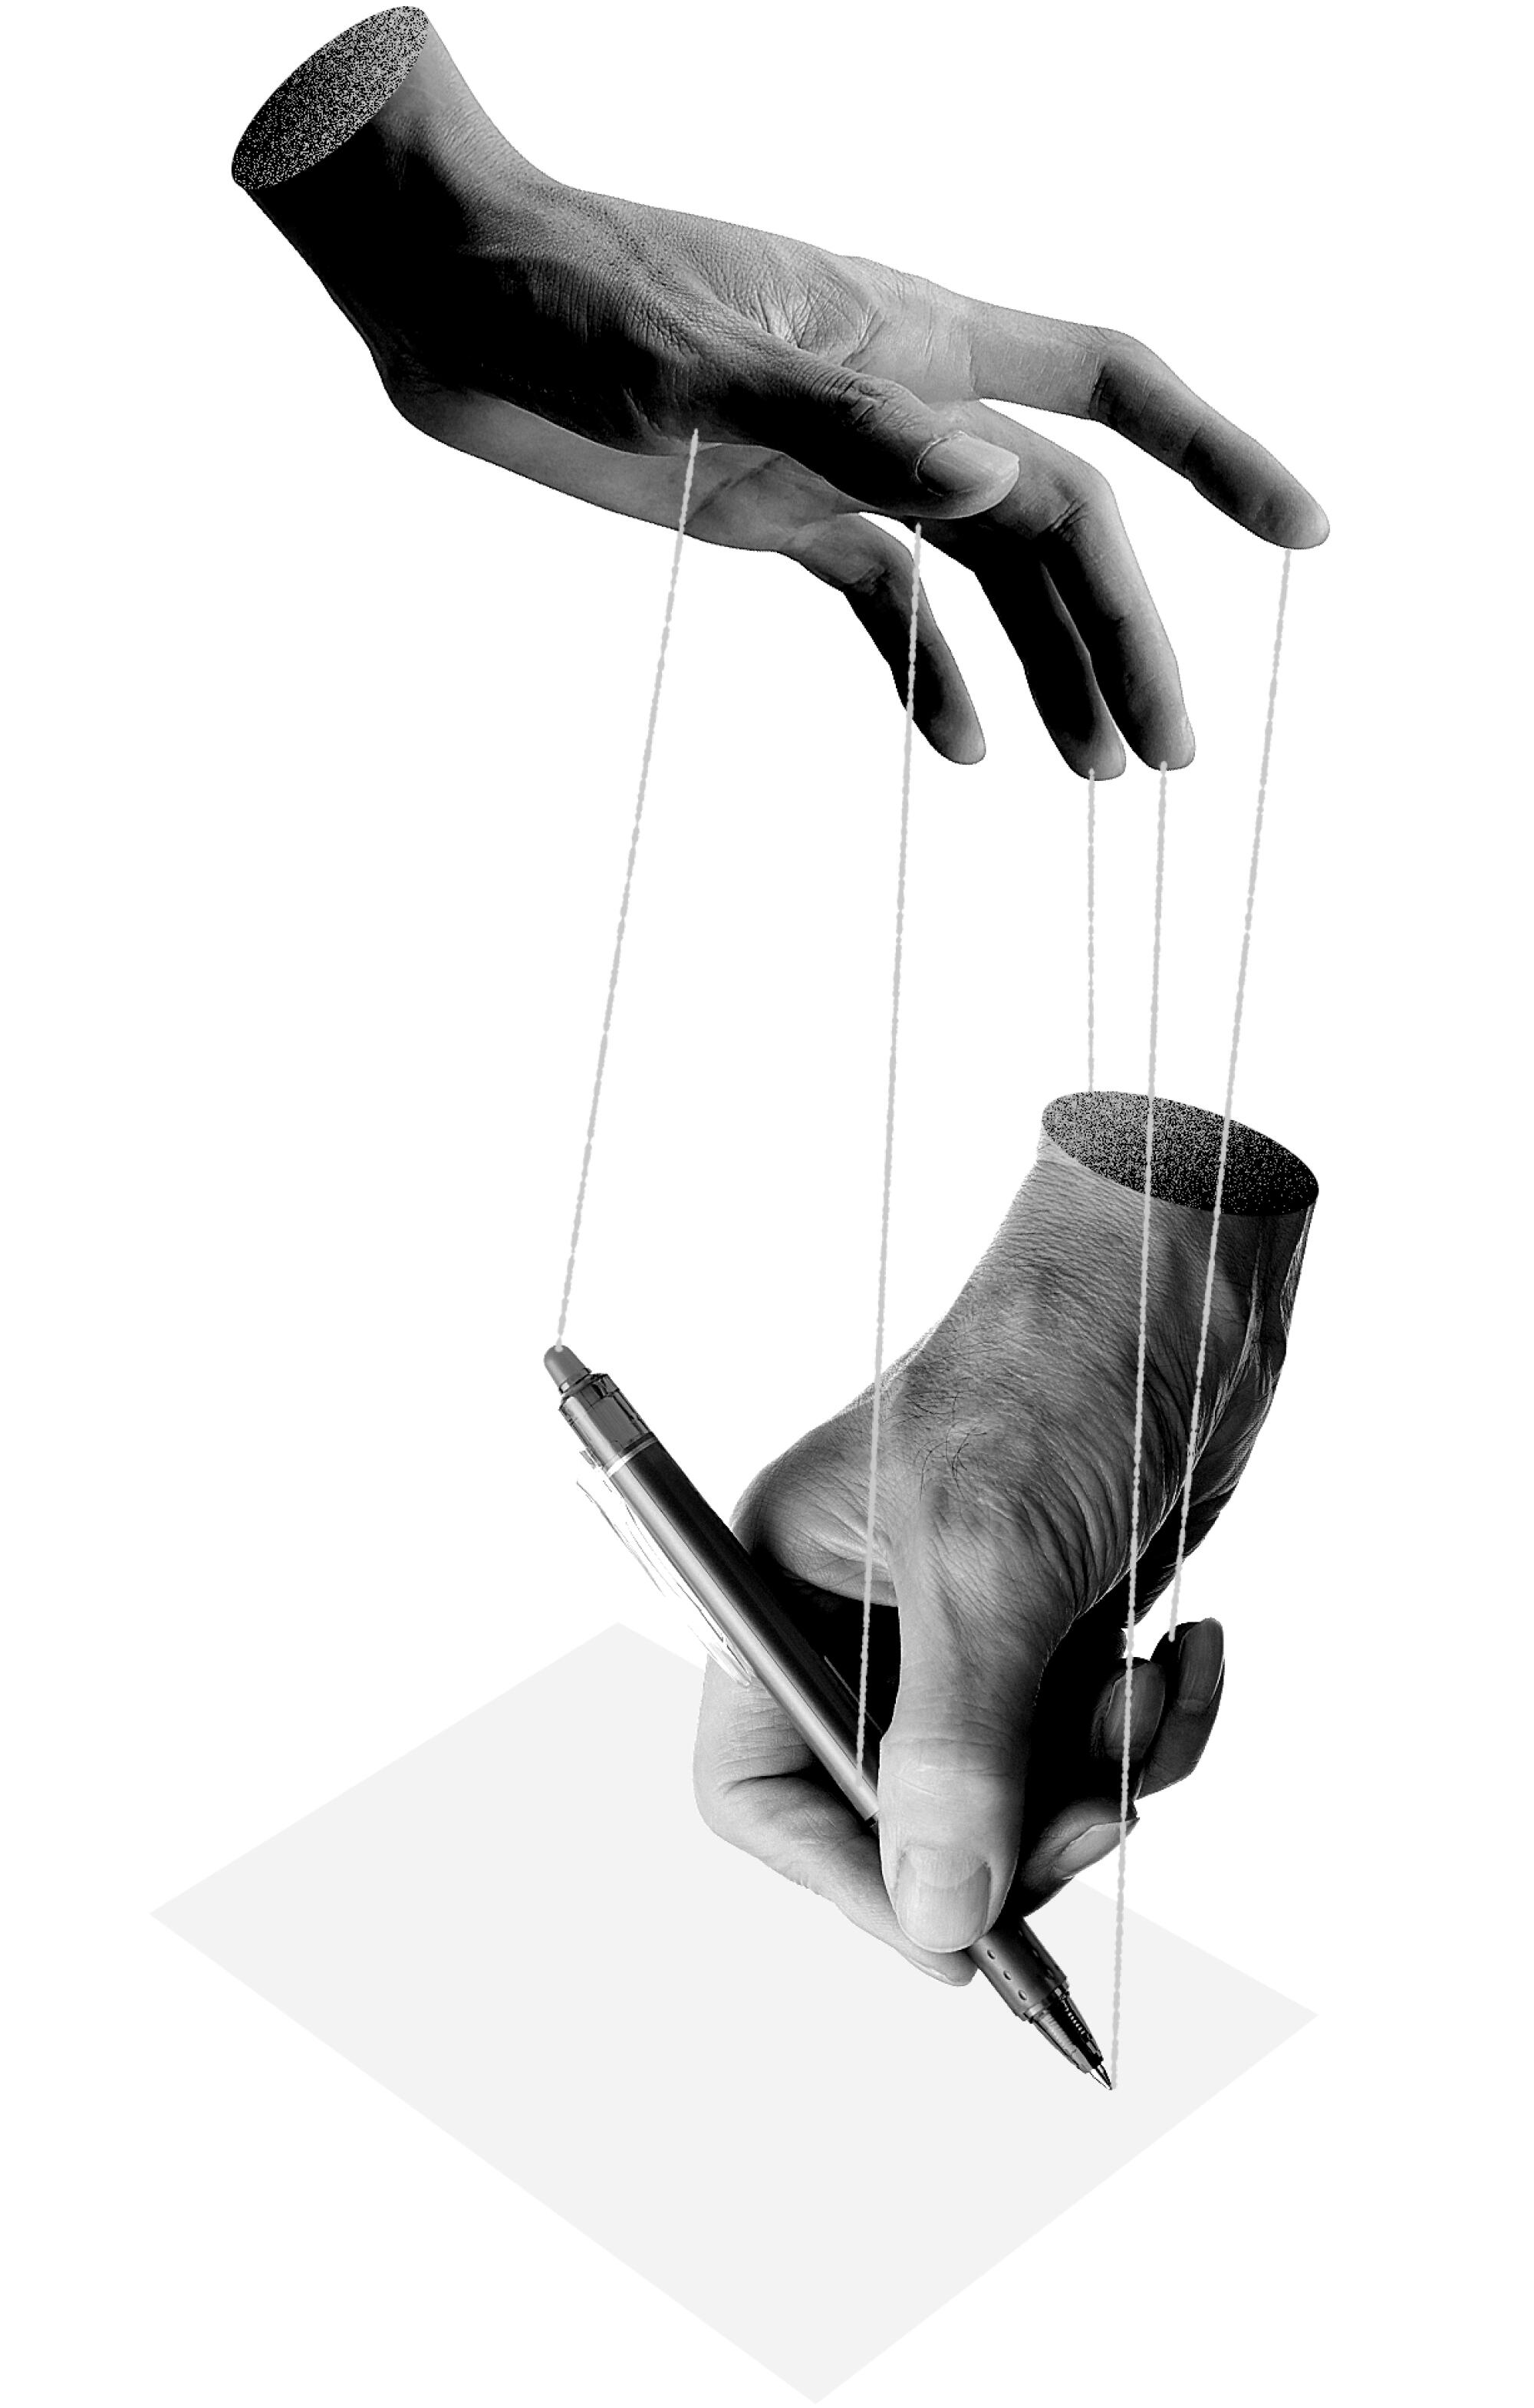 photo illustration of one hand pulling strings of another hand that is signing a document